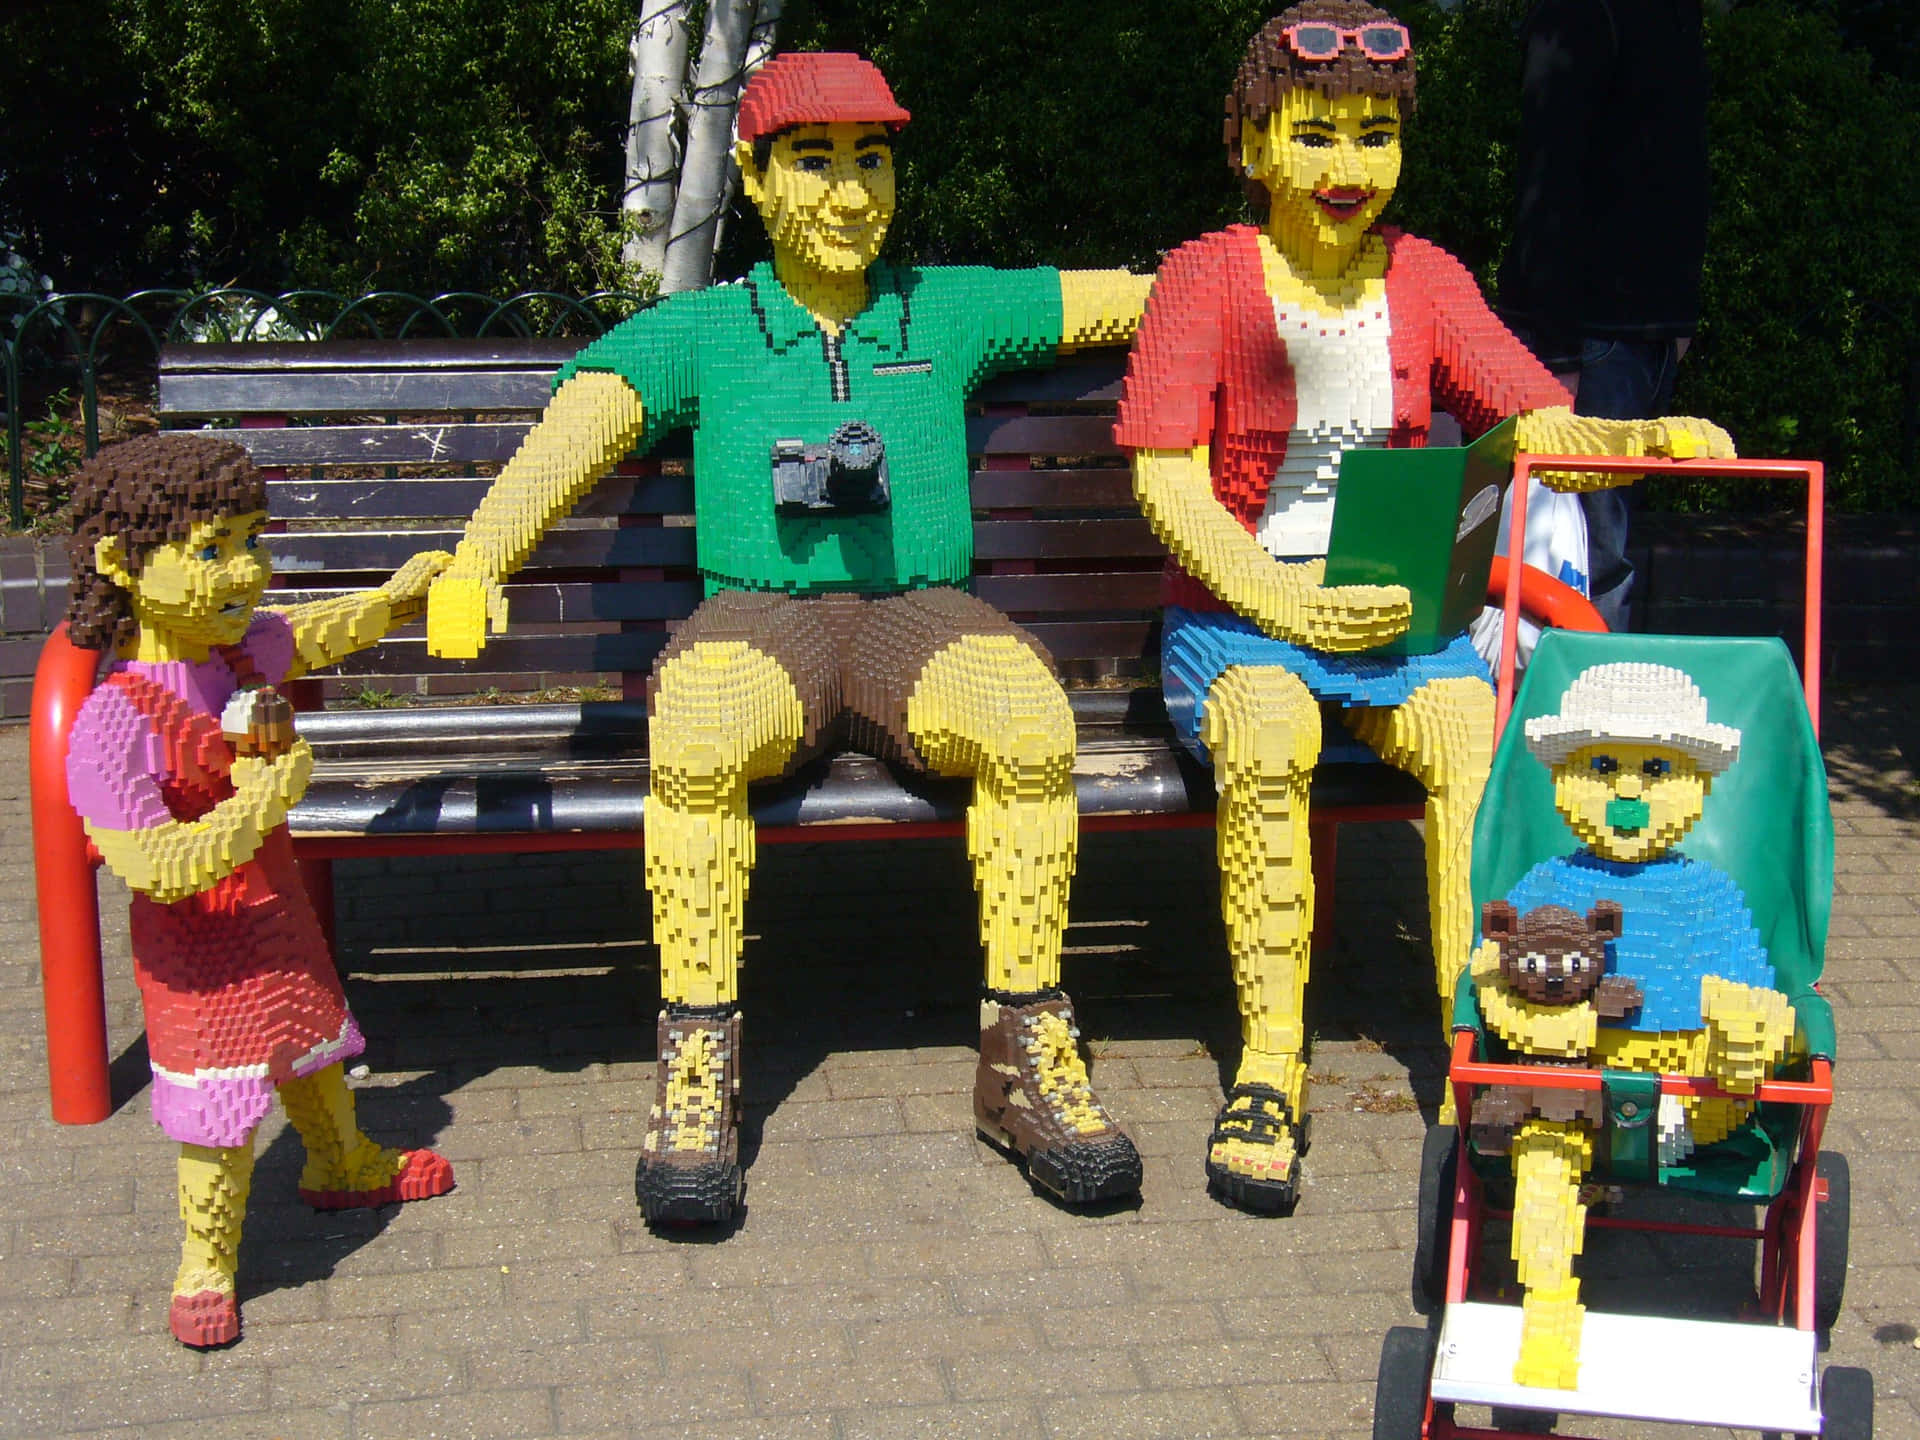 A Bench With A Lego Family On It